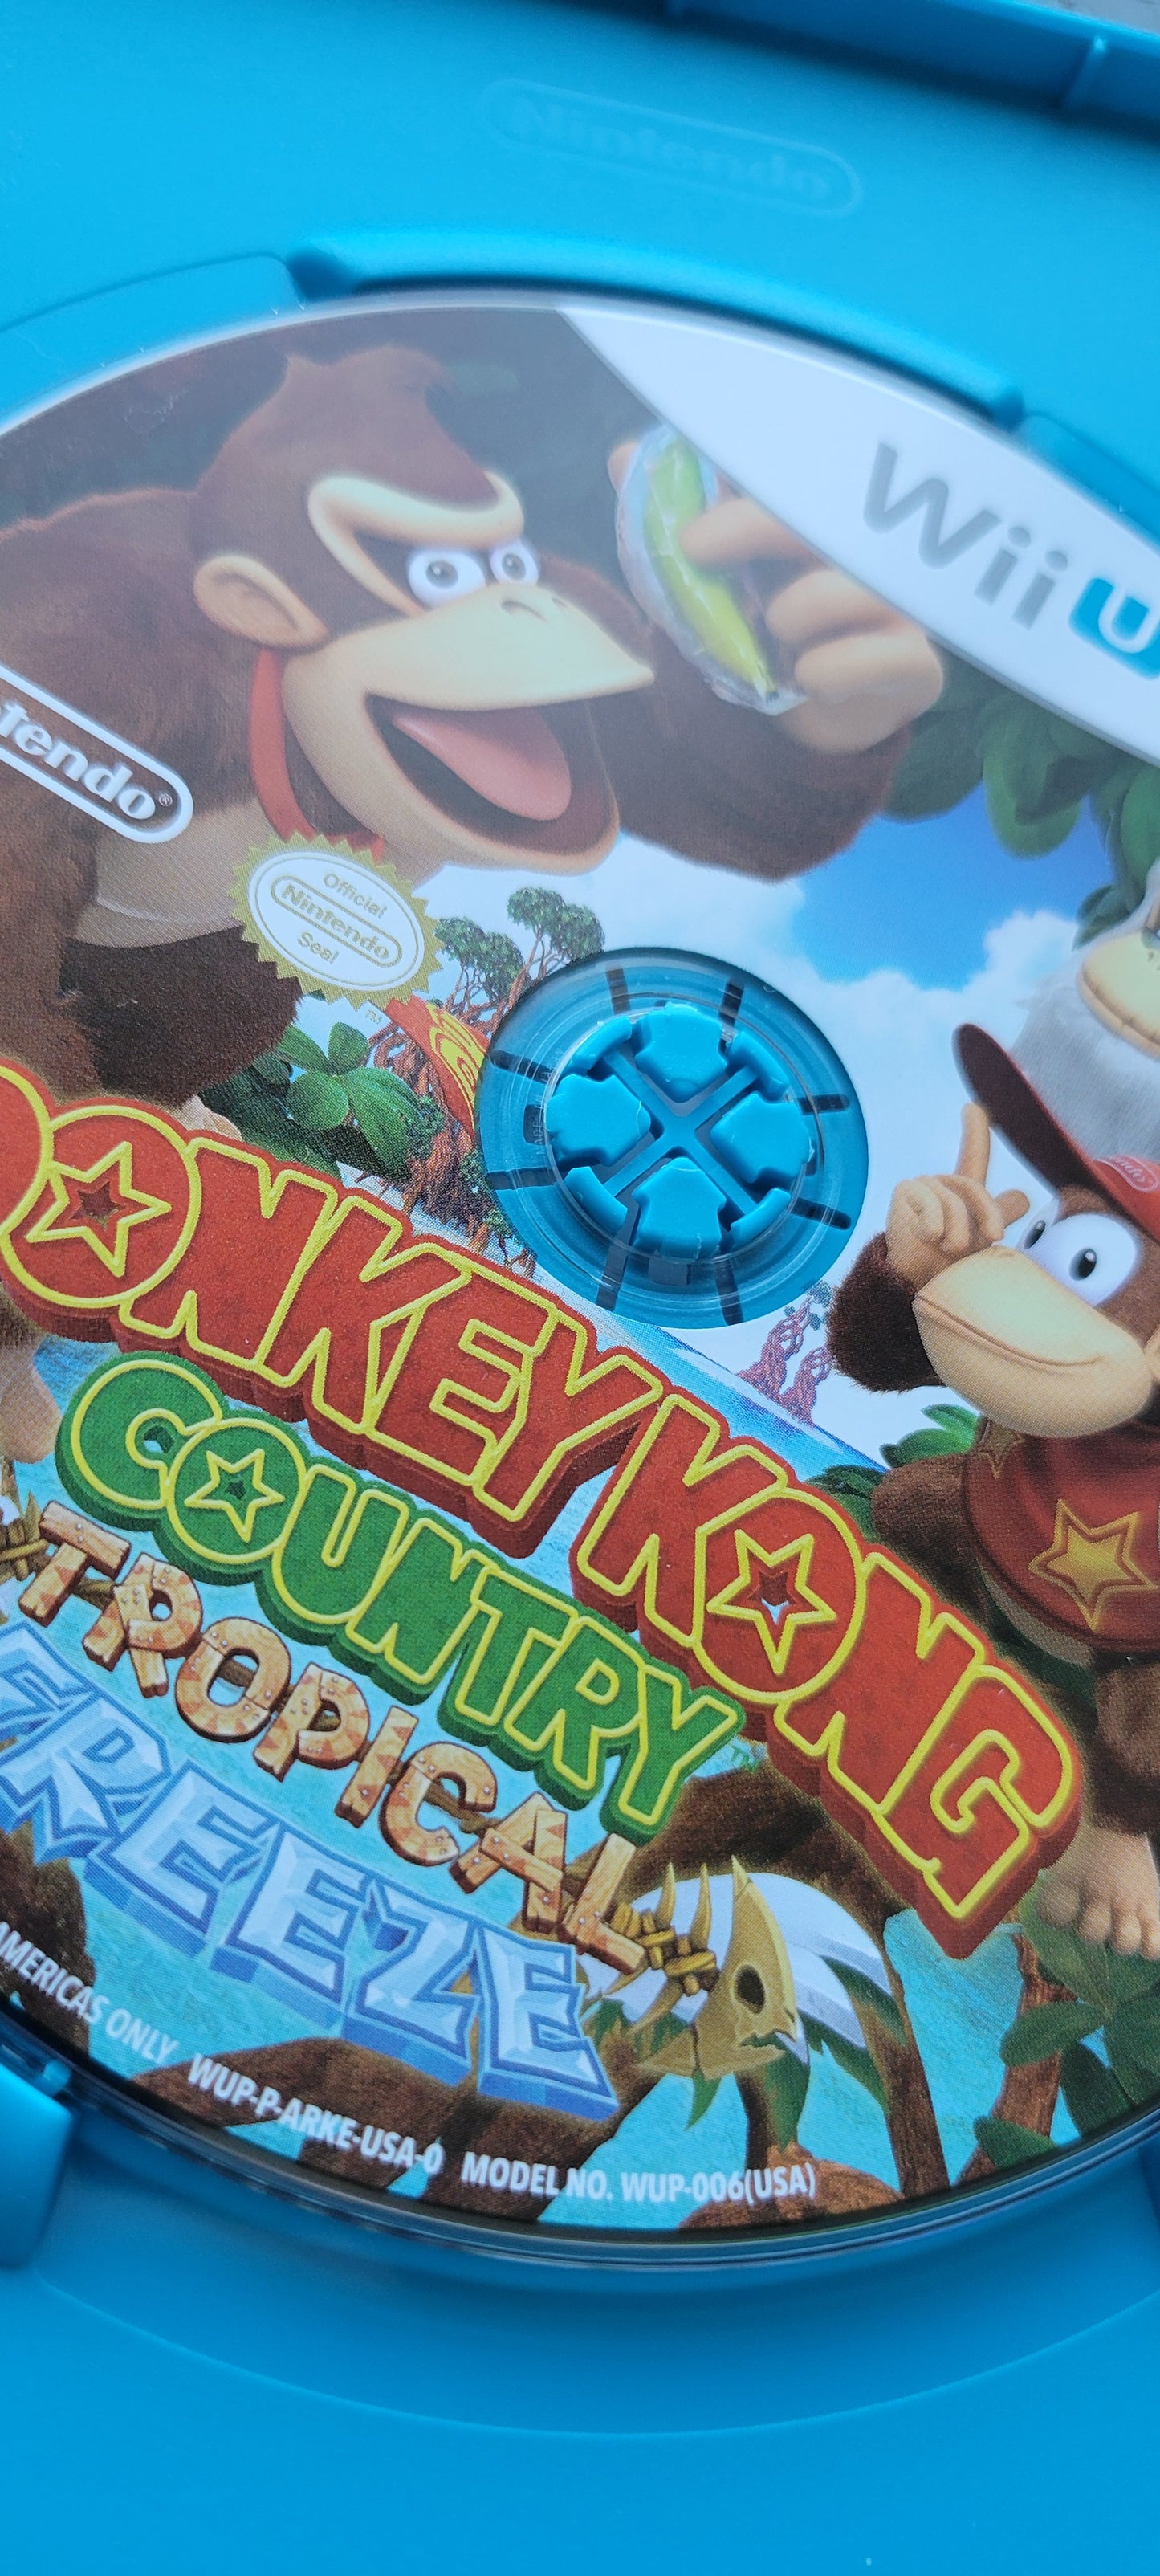 Donkey Kong Country: Tropical Freeze - Nintendo - 2014 Wii U - Entertainment System CIB Clean Disc Tested & Working